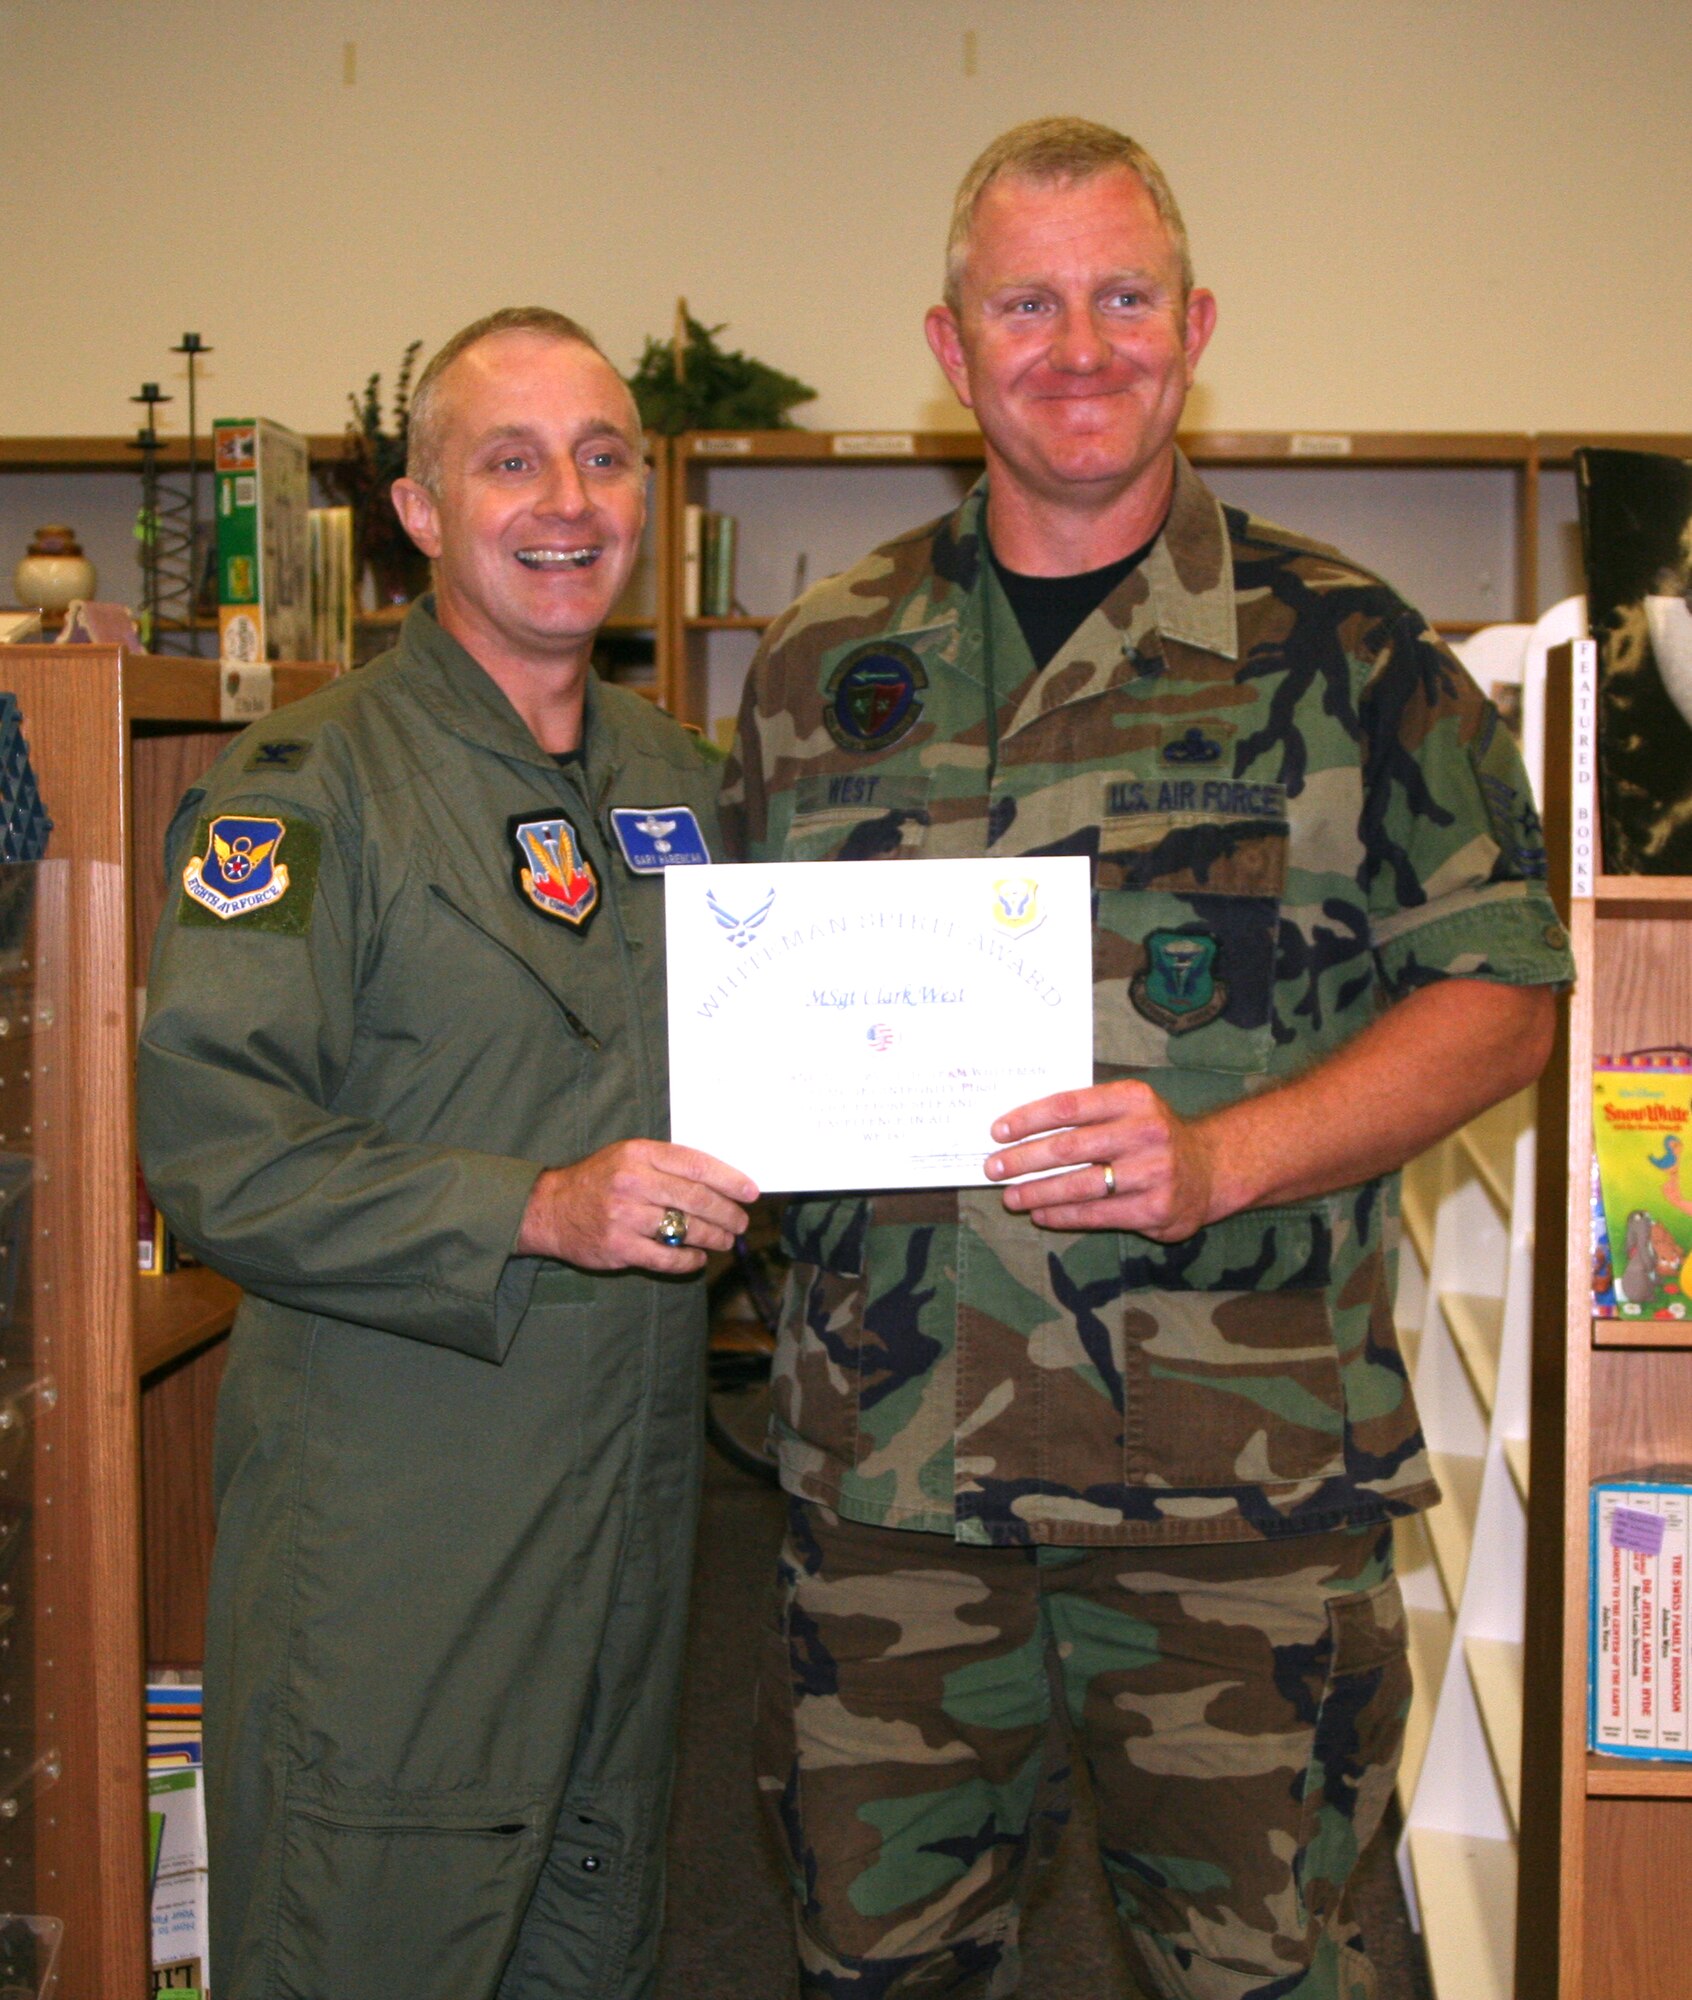 Left to right: Col. Garrett Harencak, 509th Bomb Wing commander, presents the Whiteman Spirit Award to Master Sgt. Clark West, 509th Aircraft Maintenance Squadron, Oct. 22. (U.S. Air Force photo/1st Lt. Candace Cutrufo)